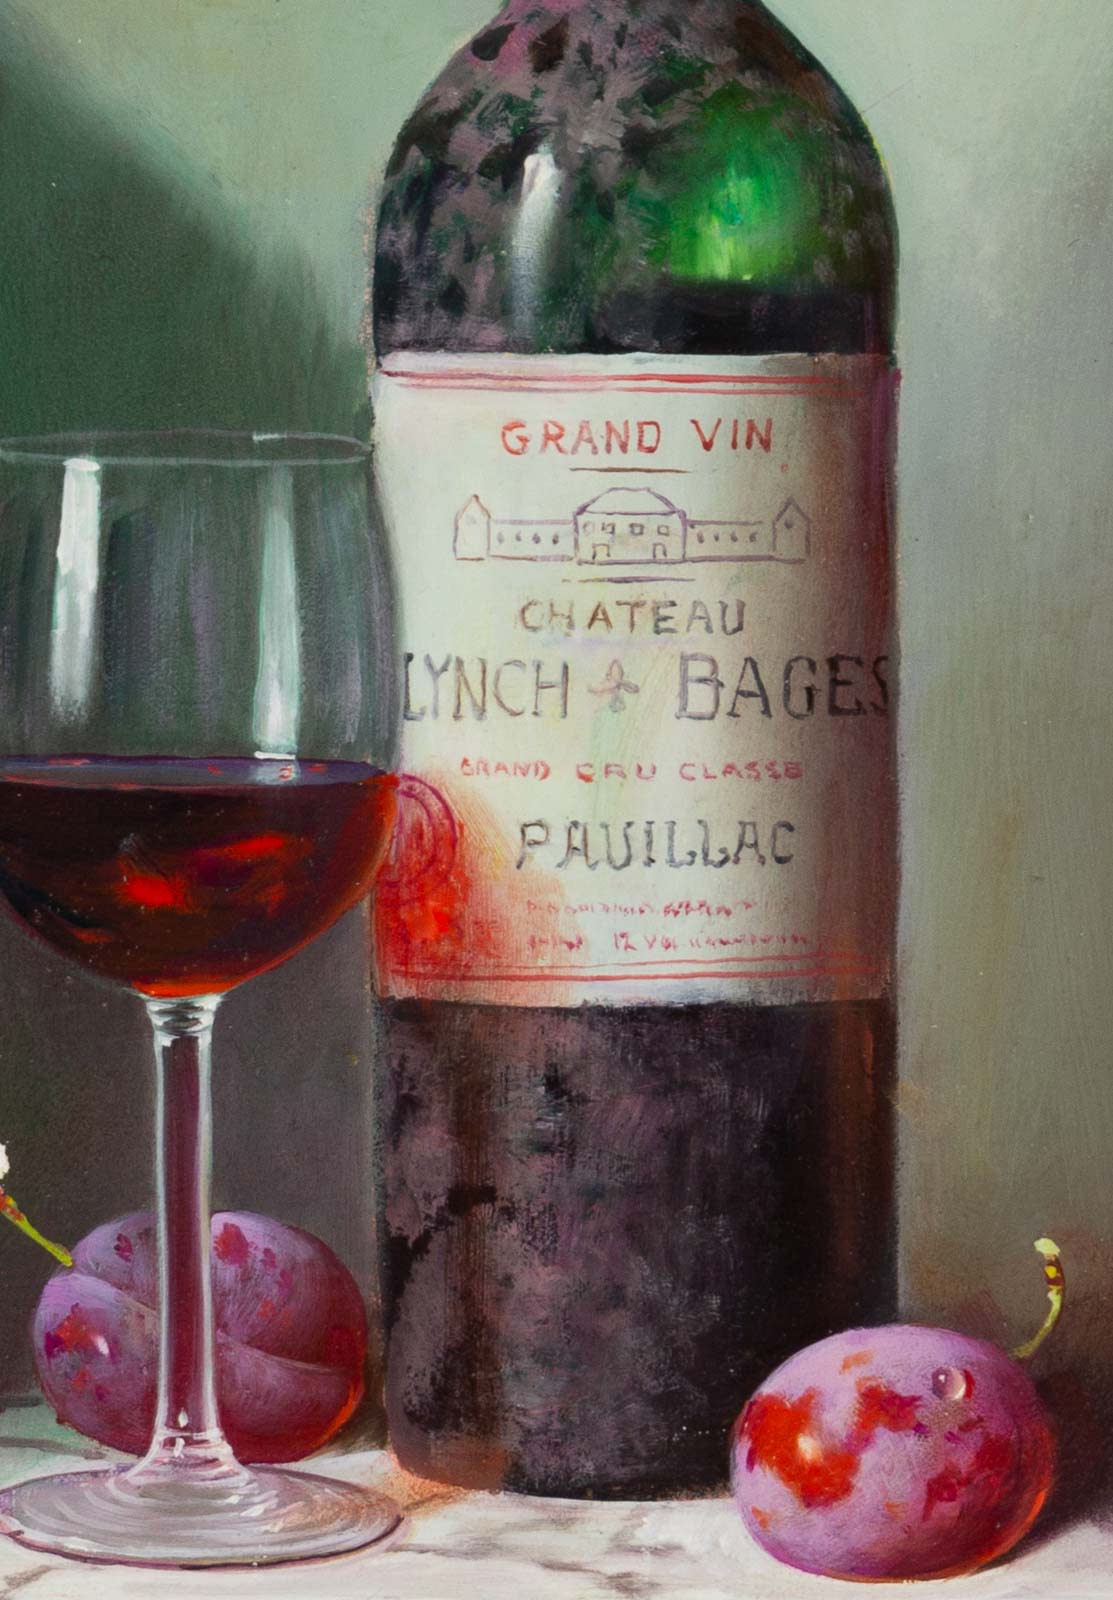 Chateau Lynch Bages, 1961